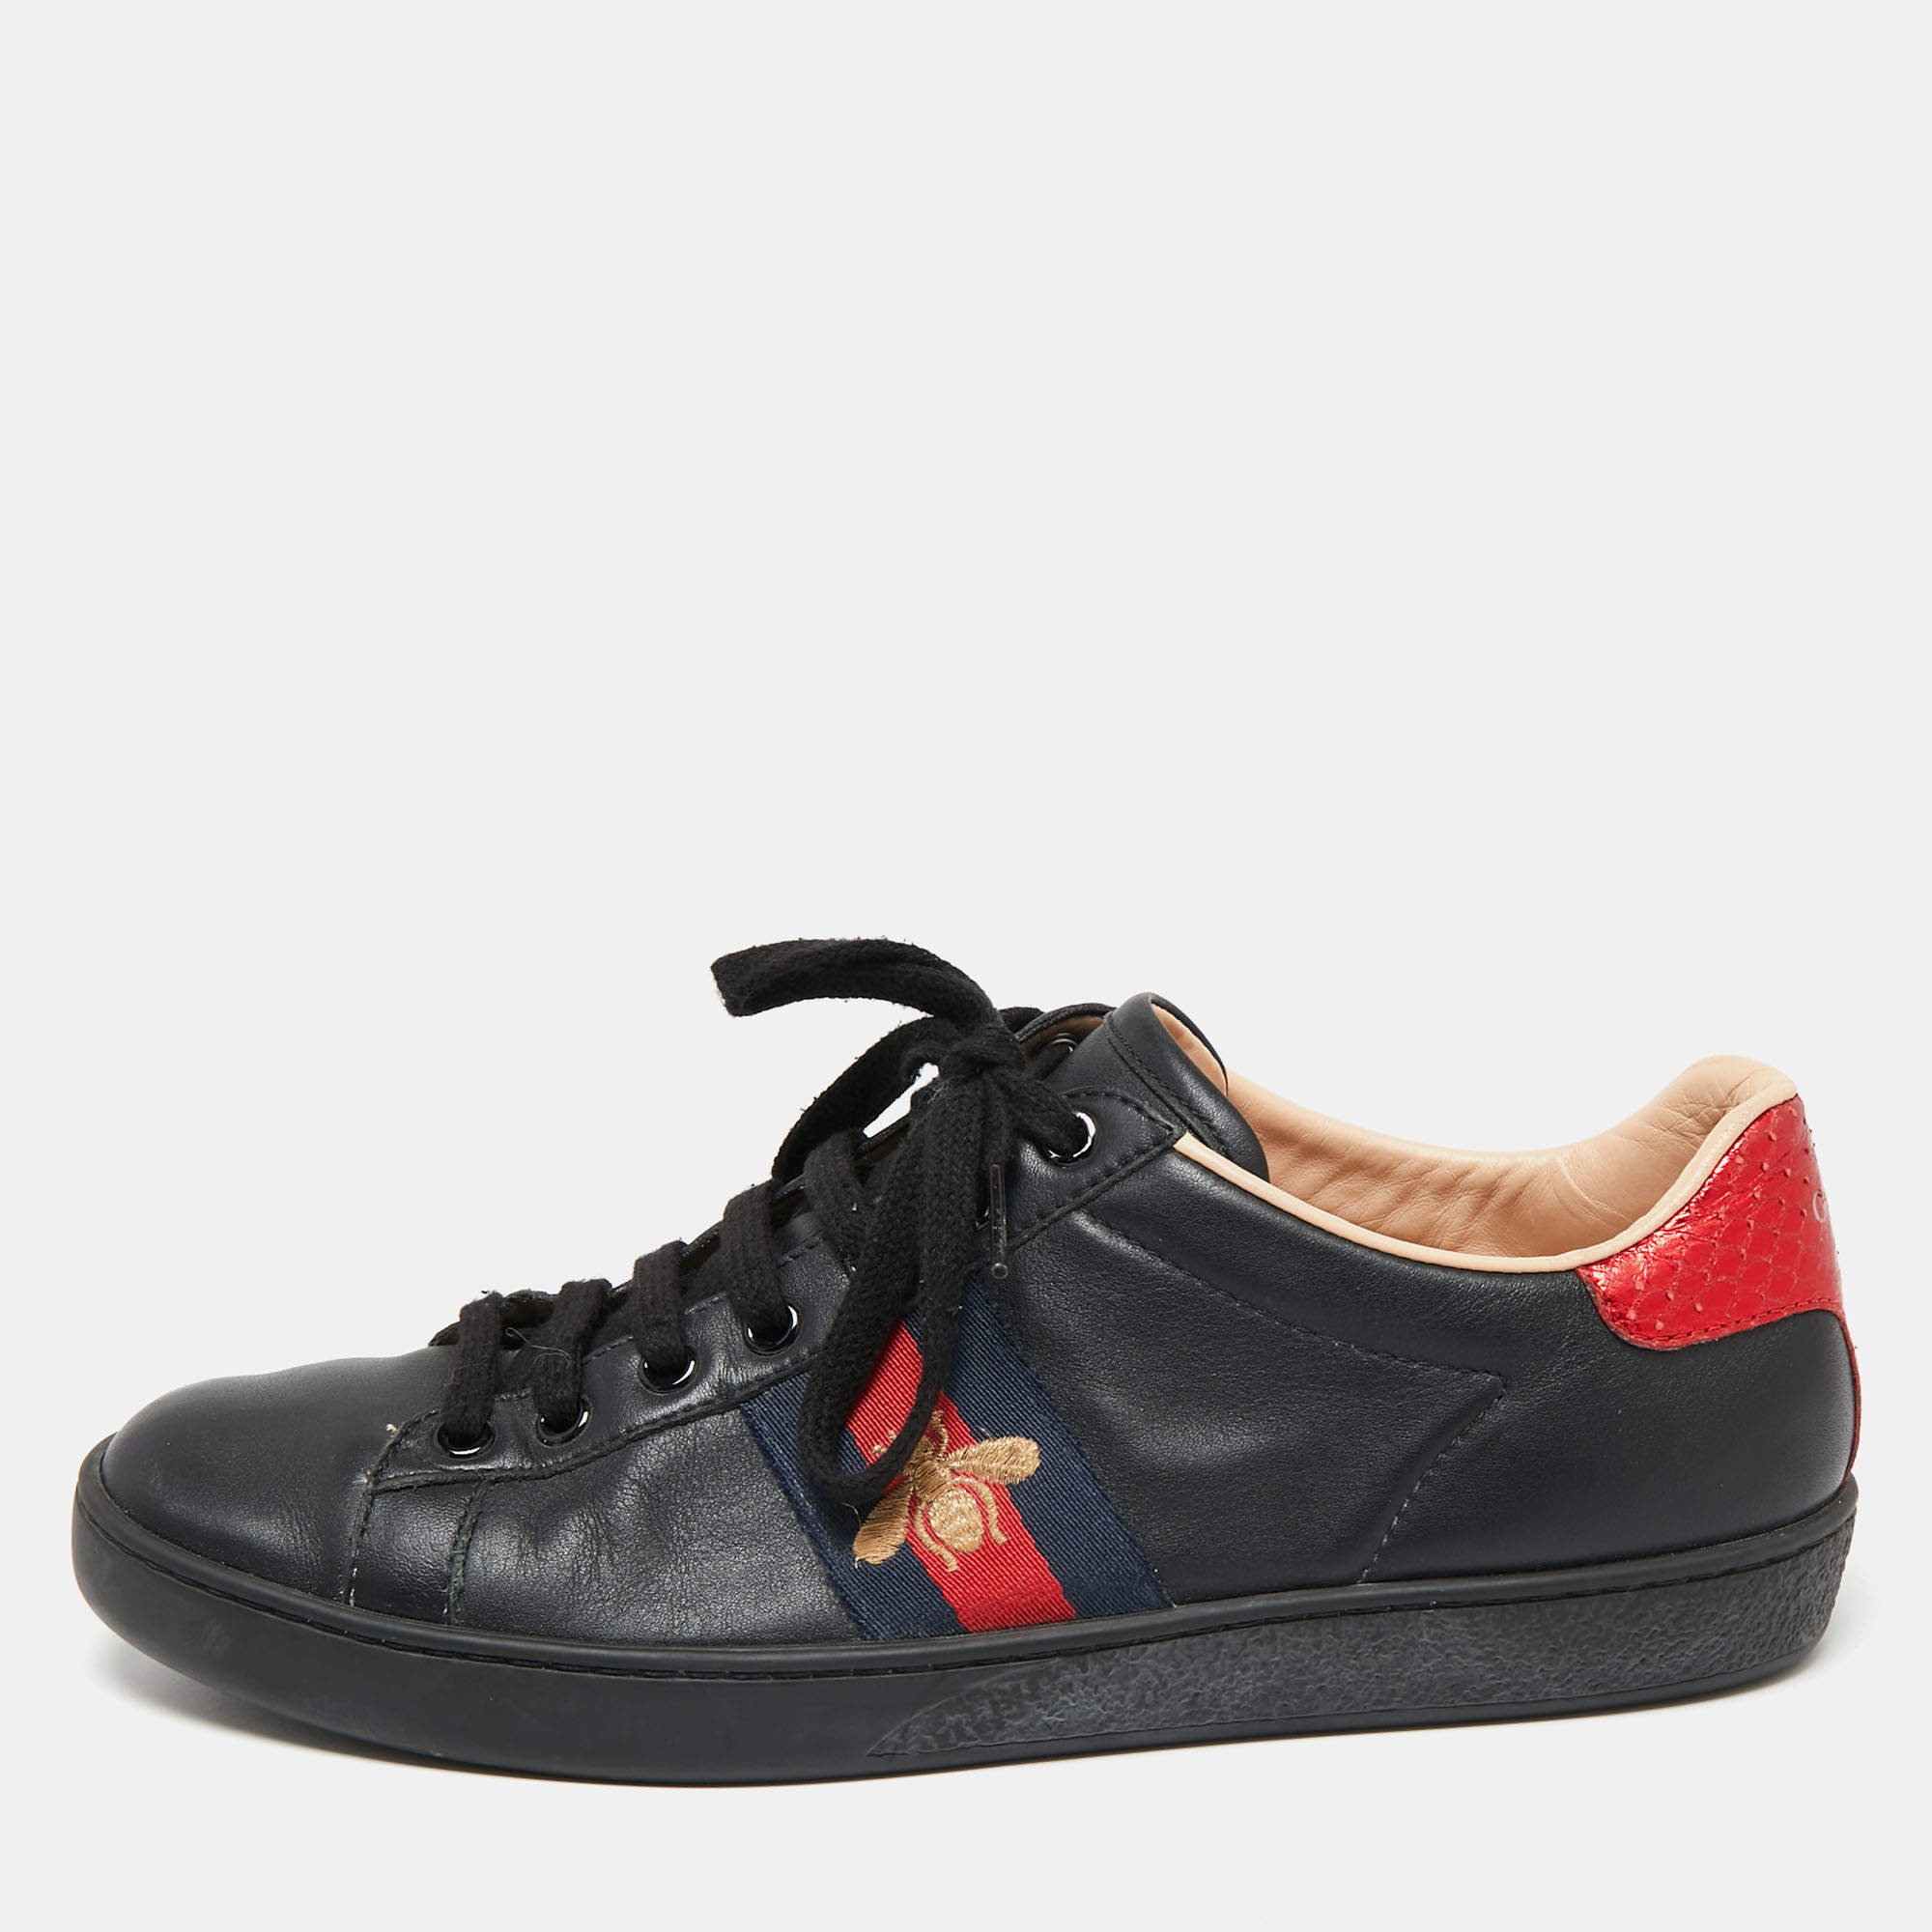 Gucci Black Leather And Python Embossed Leather  Web Ace  Sneakers  Size 39